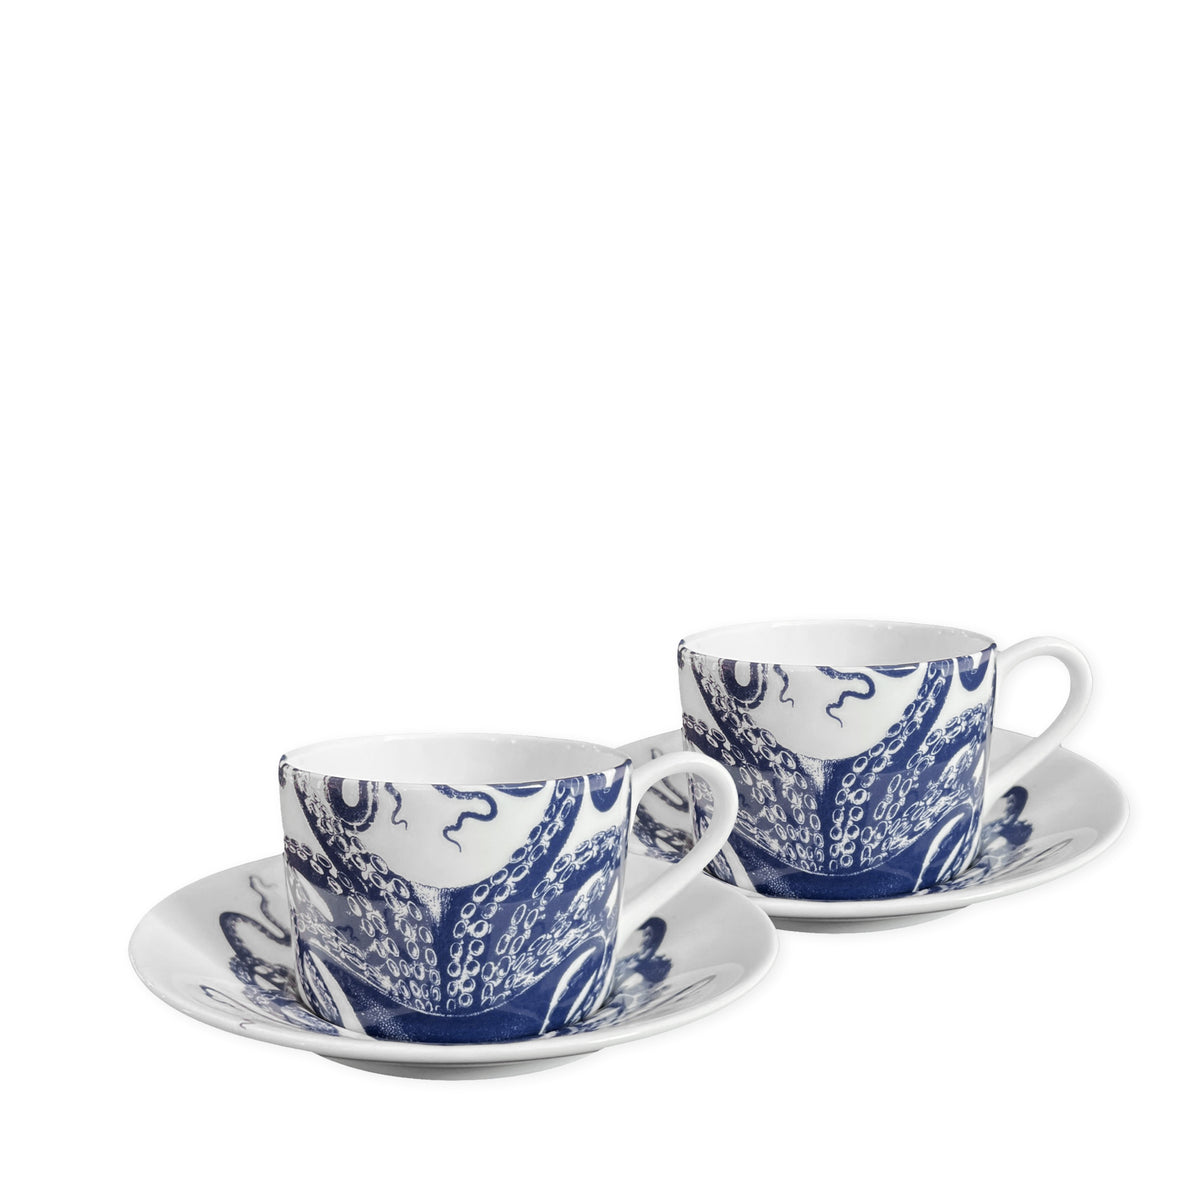 Two white ceramic teacups and saucers featuring charming blue octopus designs, crafted from bone china and dishwasher safe are known as the Lucy Cups &amp; Saucers, Set of 2 by Caskata.